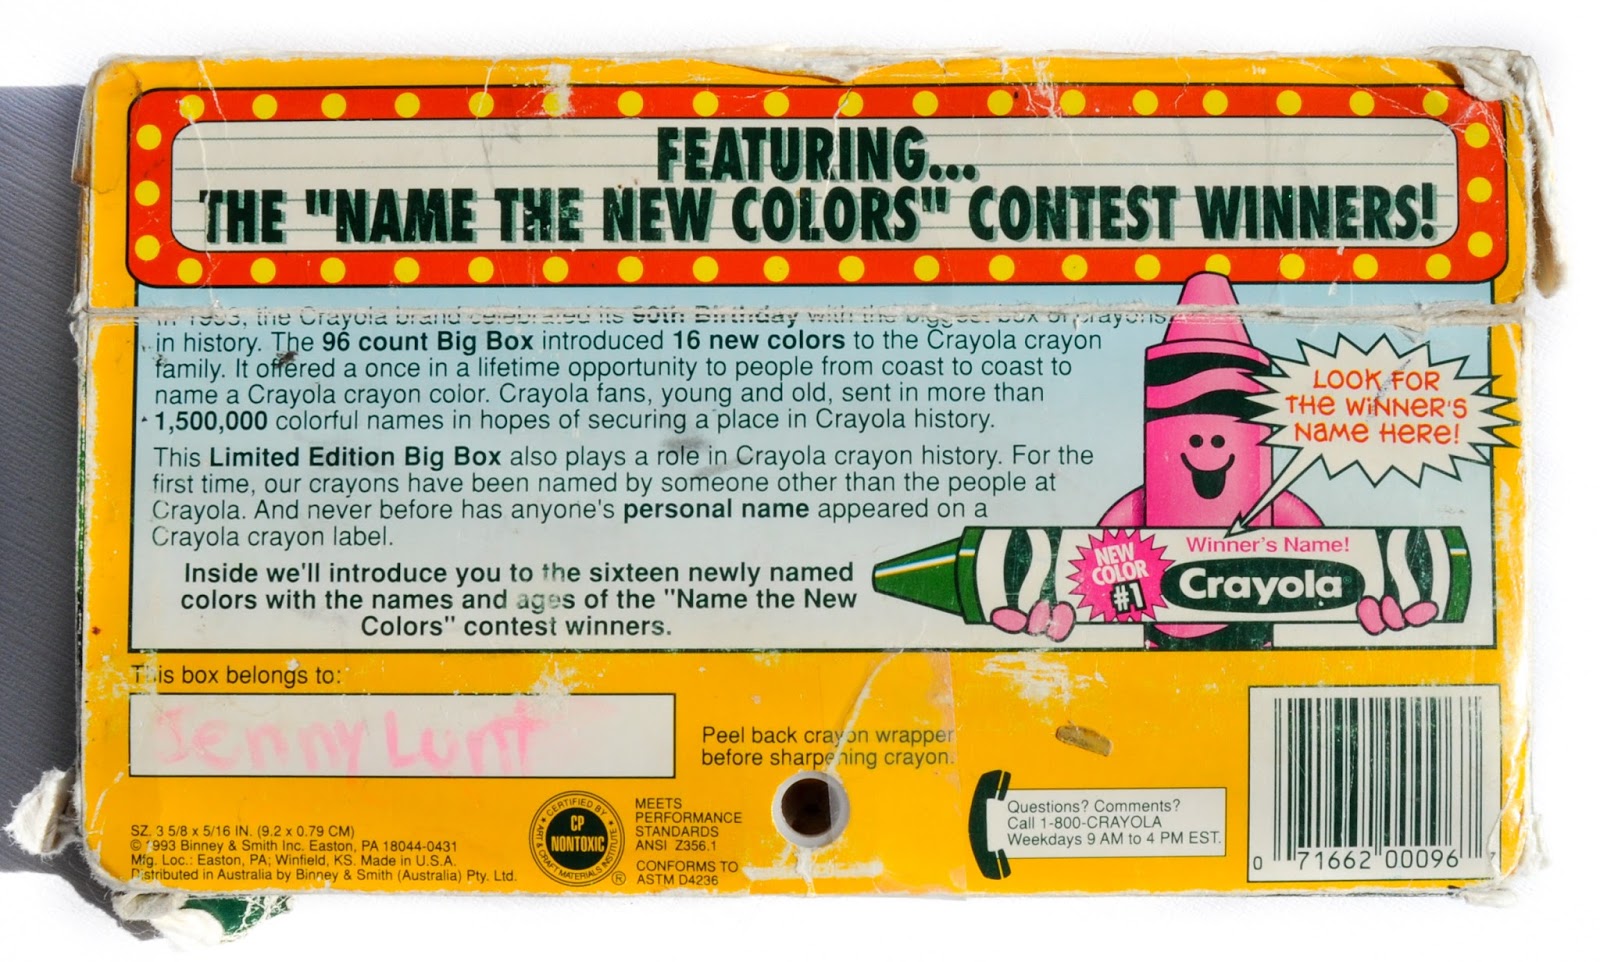 USED Vintage Crayola 96 BIG BOX Limited Edition Name The New Colors 1993